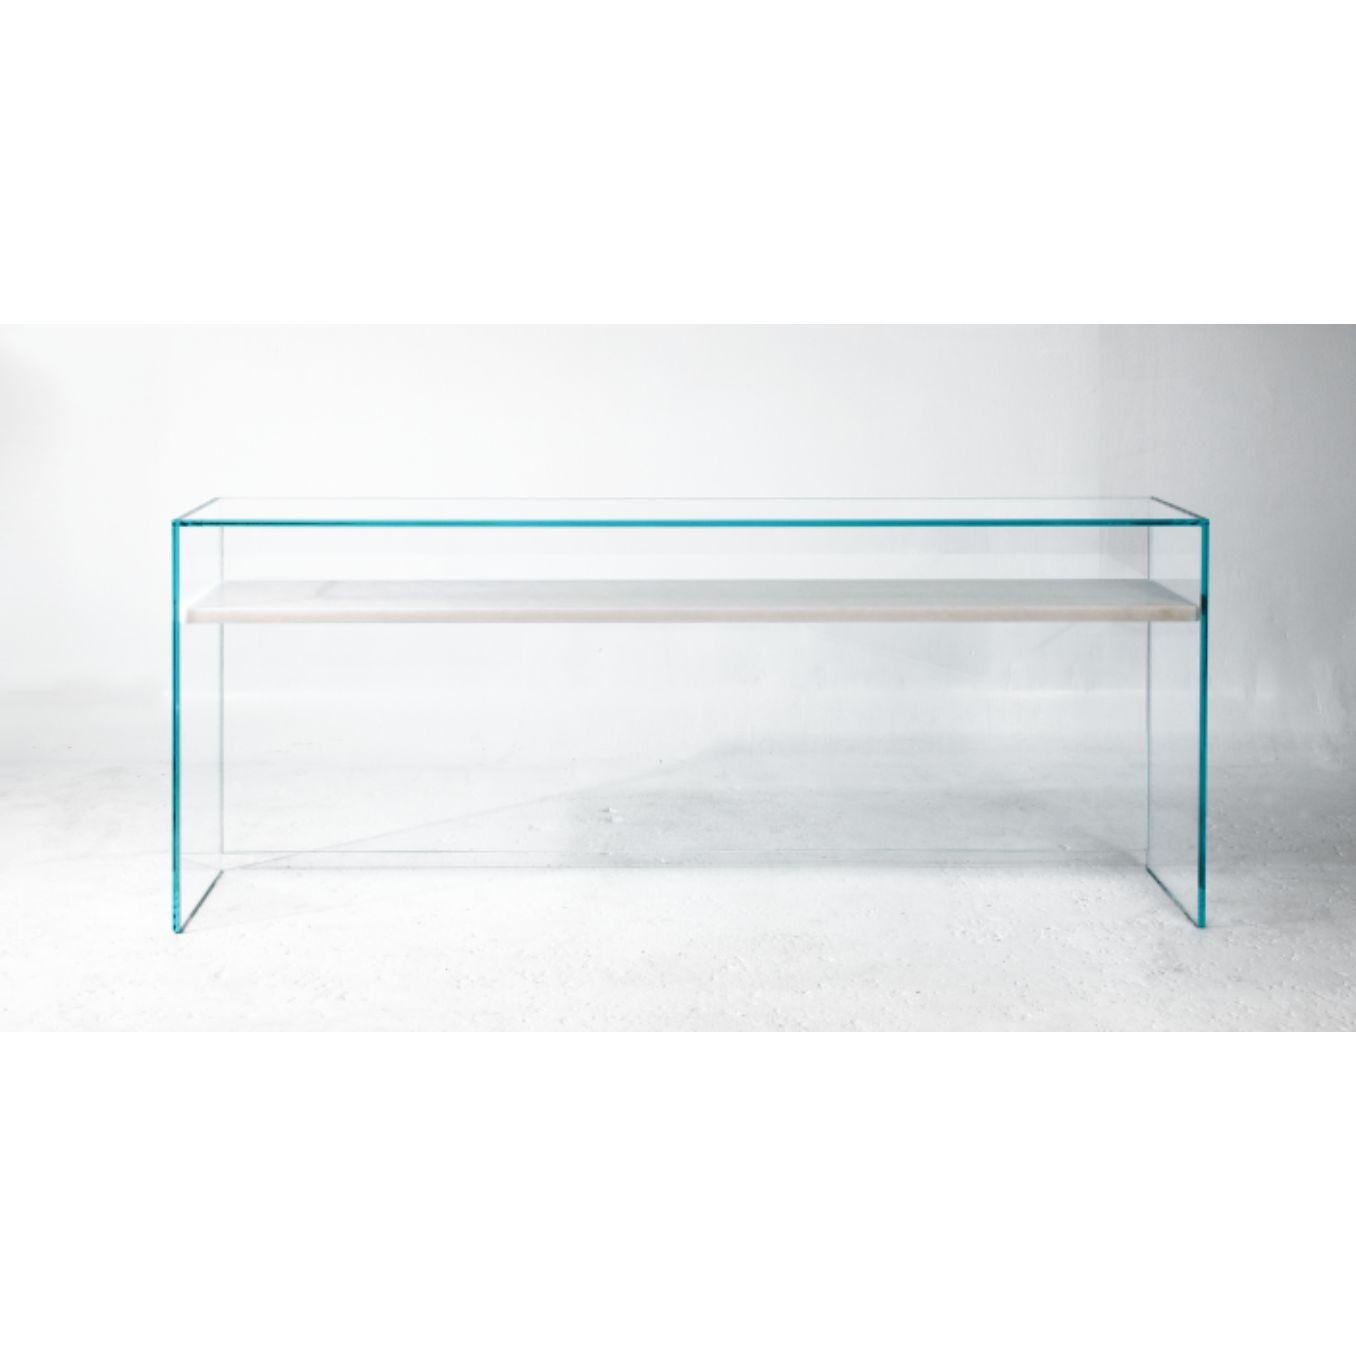 To Float From Grace Console Table by Claste
Dimensions: D 40.6 x W 137.2 x H 76.2 cm
Material: Marble, Glass
Weight: 125 kg

Since 2017 Quinlan Osborne has cultivated an aesthetic in his work that is rooted in the passion for contemporary design he